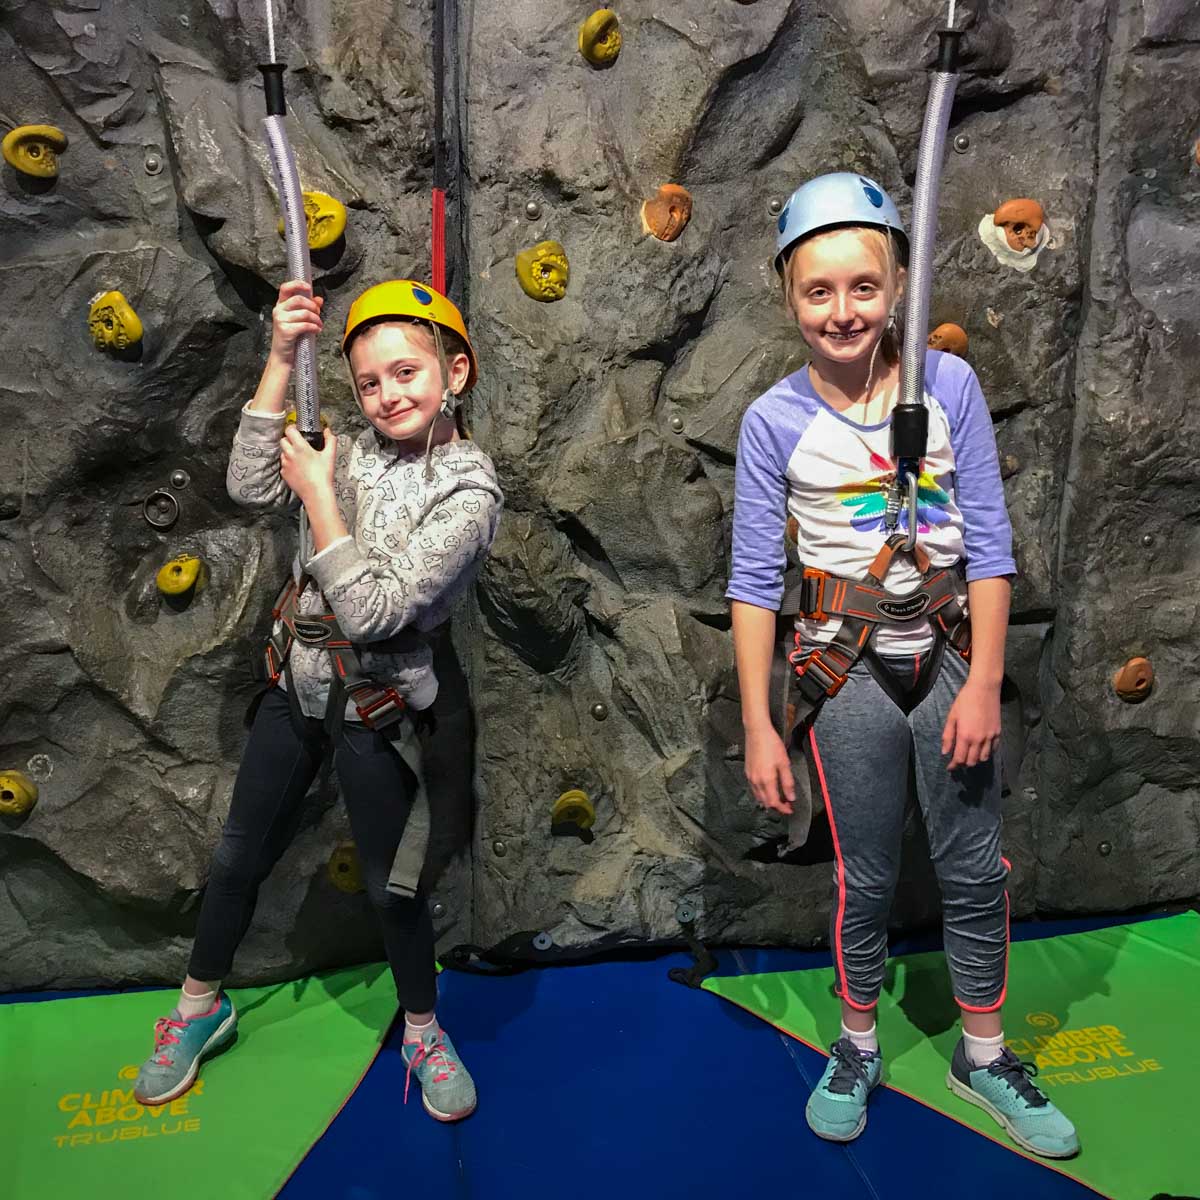 Two young girls are ready to rockwall climb with harnesses.